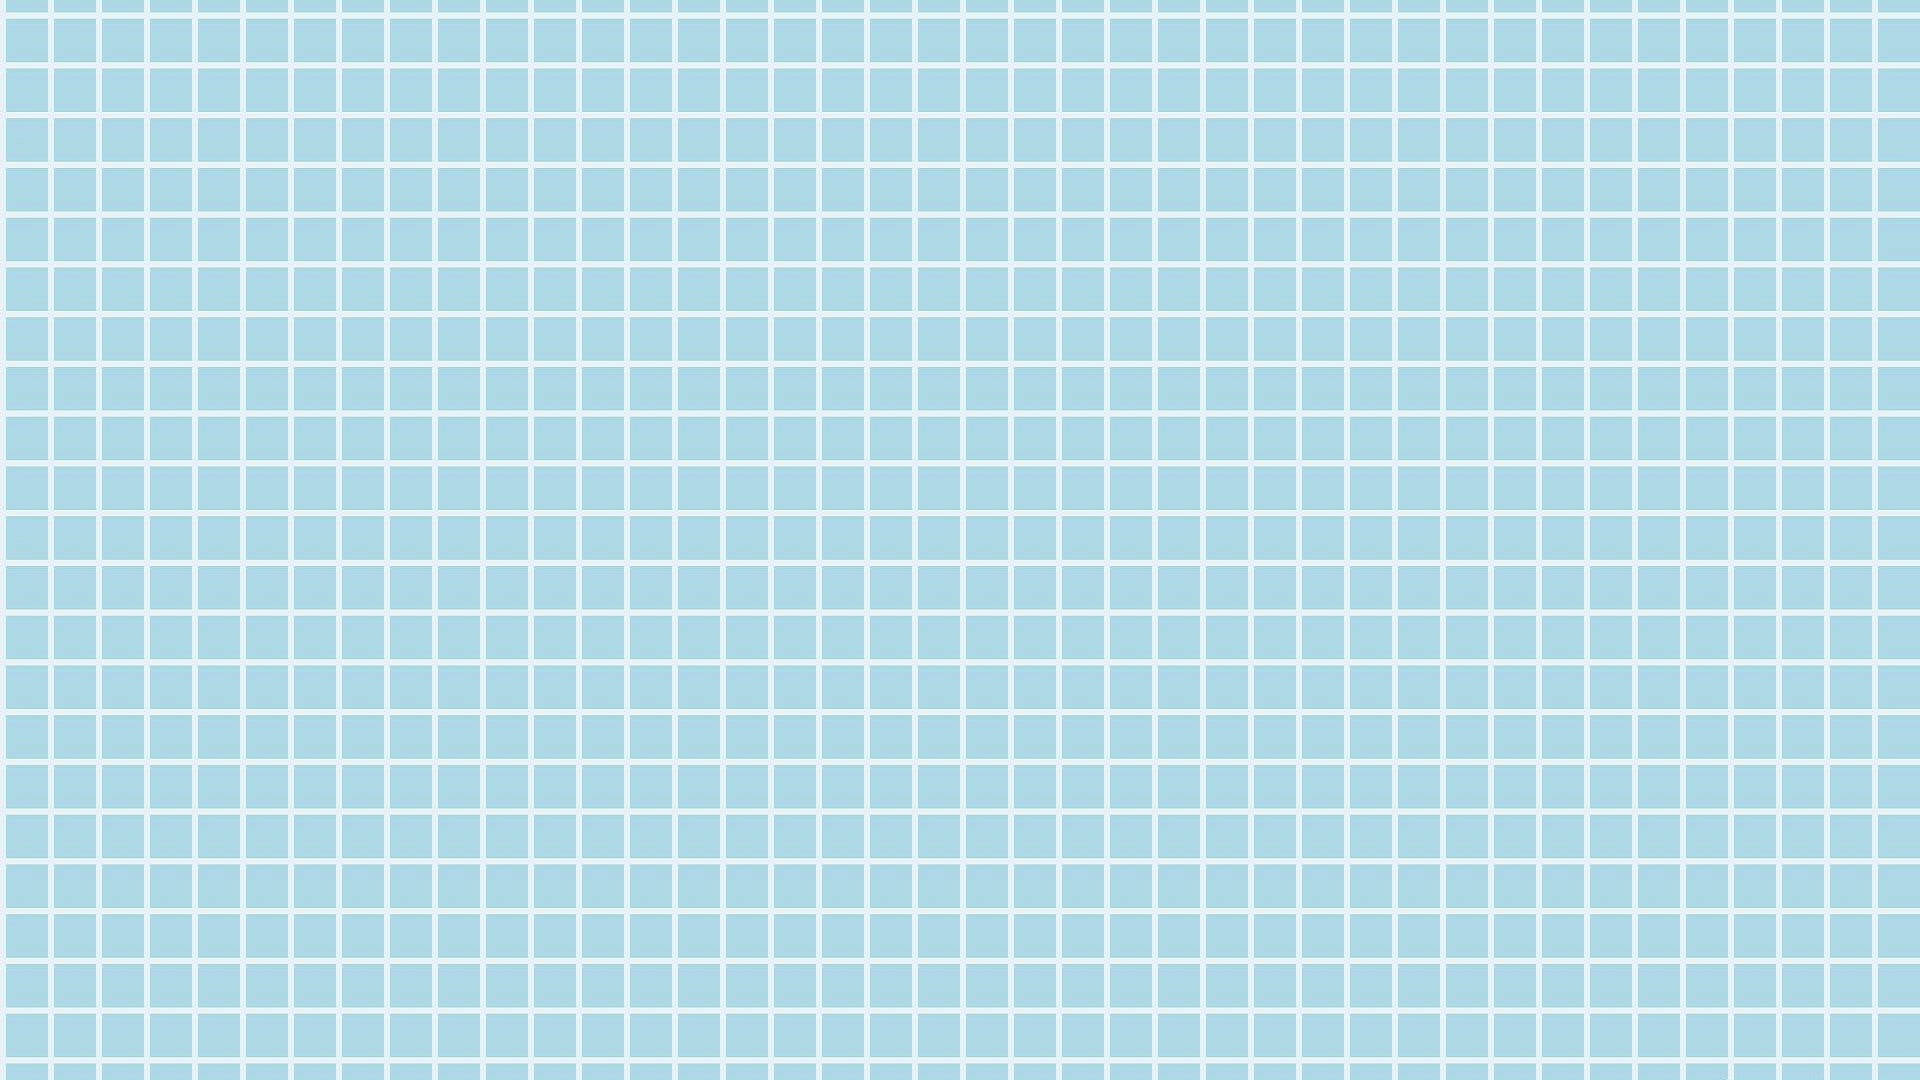 Download Simple Blue Aesthetic Checkered Pattern Wallpaper | Wallpapers.com